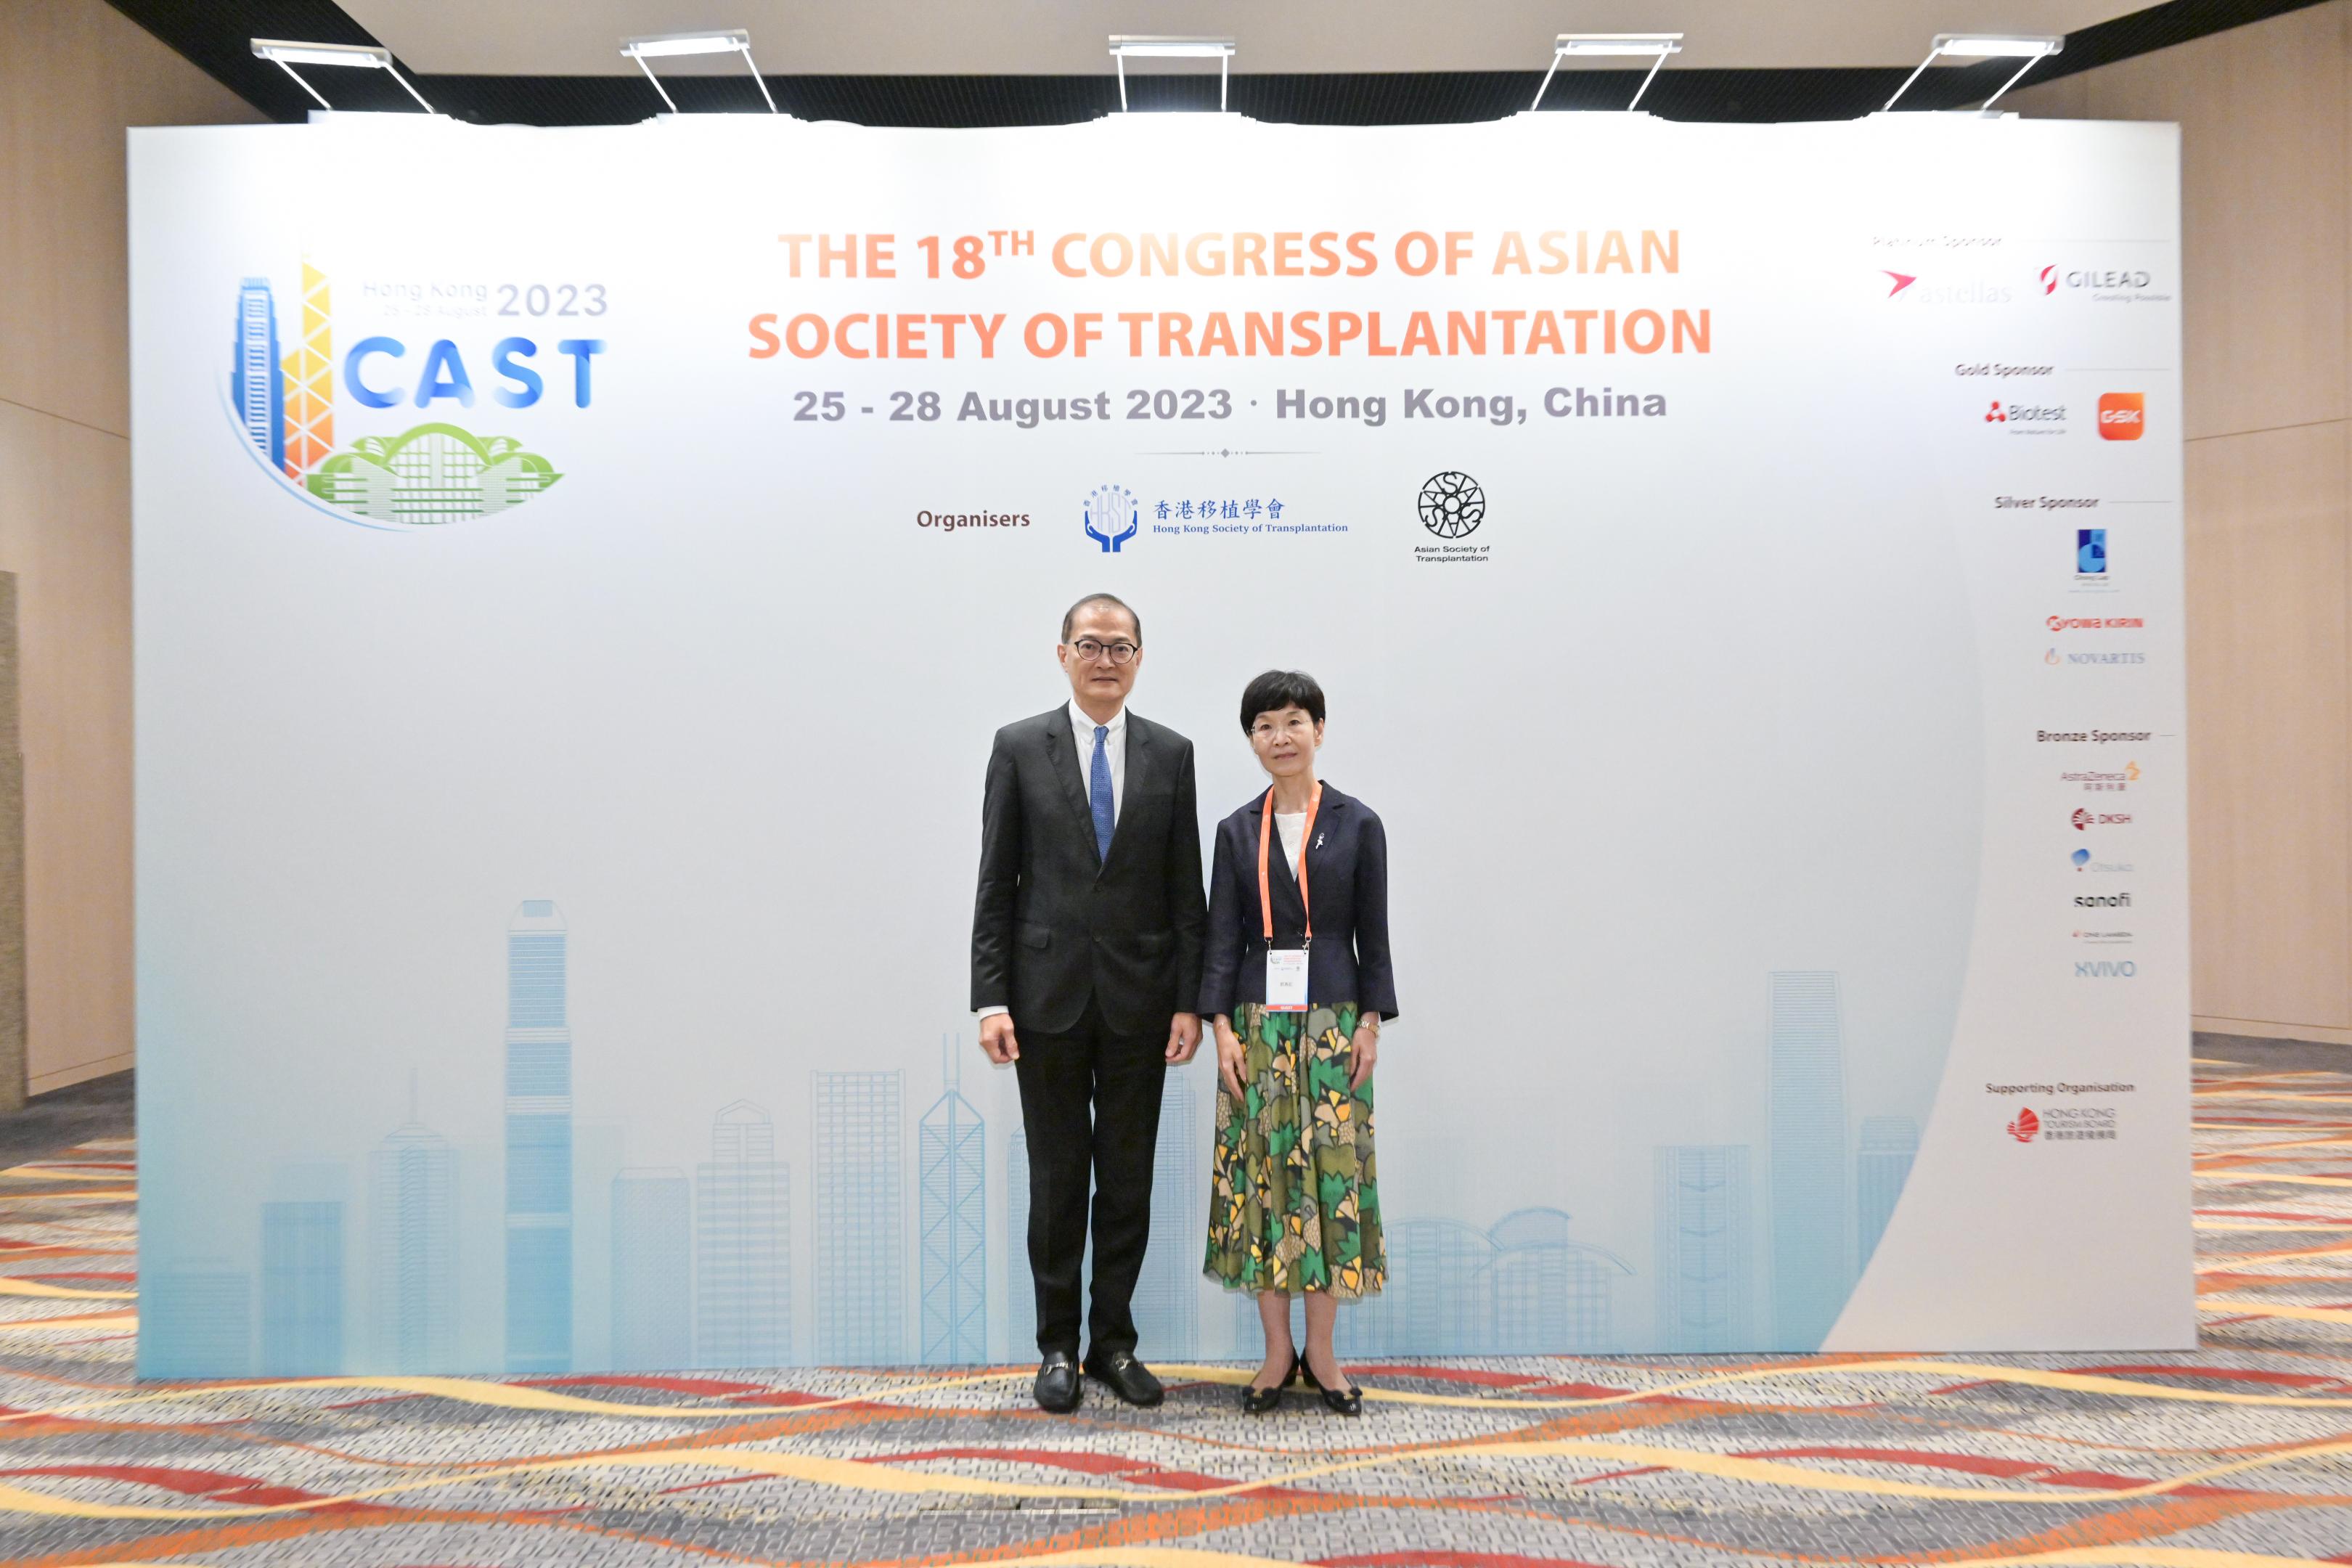 The Secretary for Health, Professor Lo Chung-mau, attended the opening ceremony of the 18th Congress of Asian Society of Transplantation today (August 25). Photo shows Professor Lo (left) and the Director-General of the Department of Medical Emergency Response of the National Health Commission, Ms Guo Yanhong (right), before the opening ceremony.